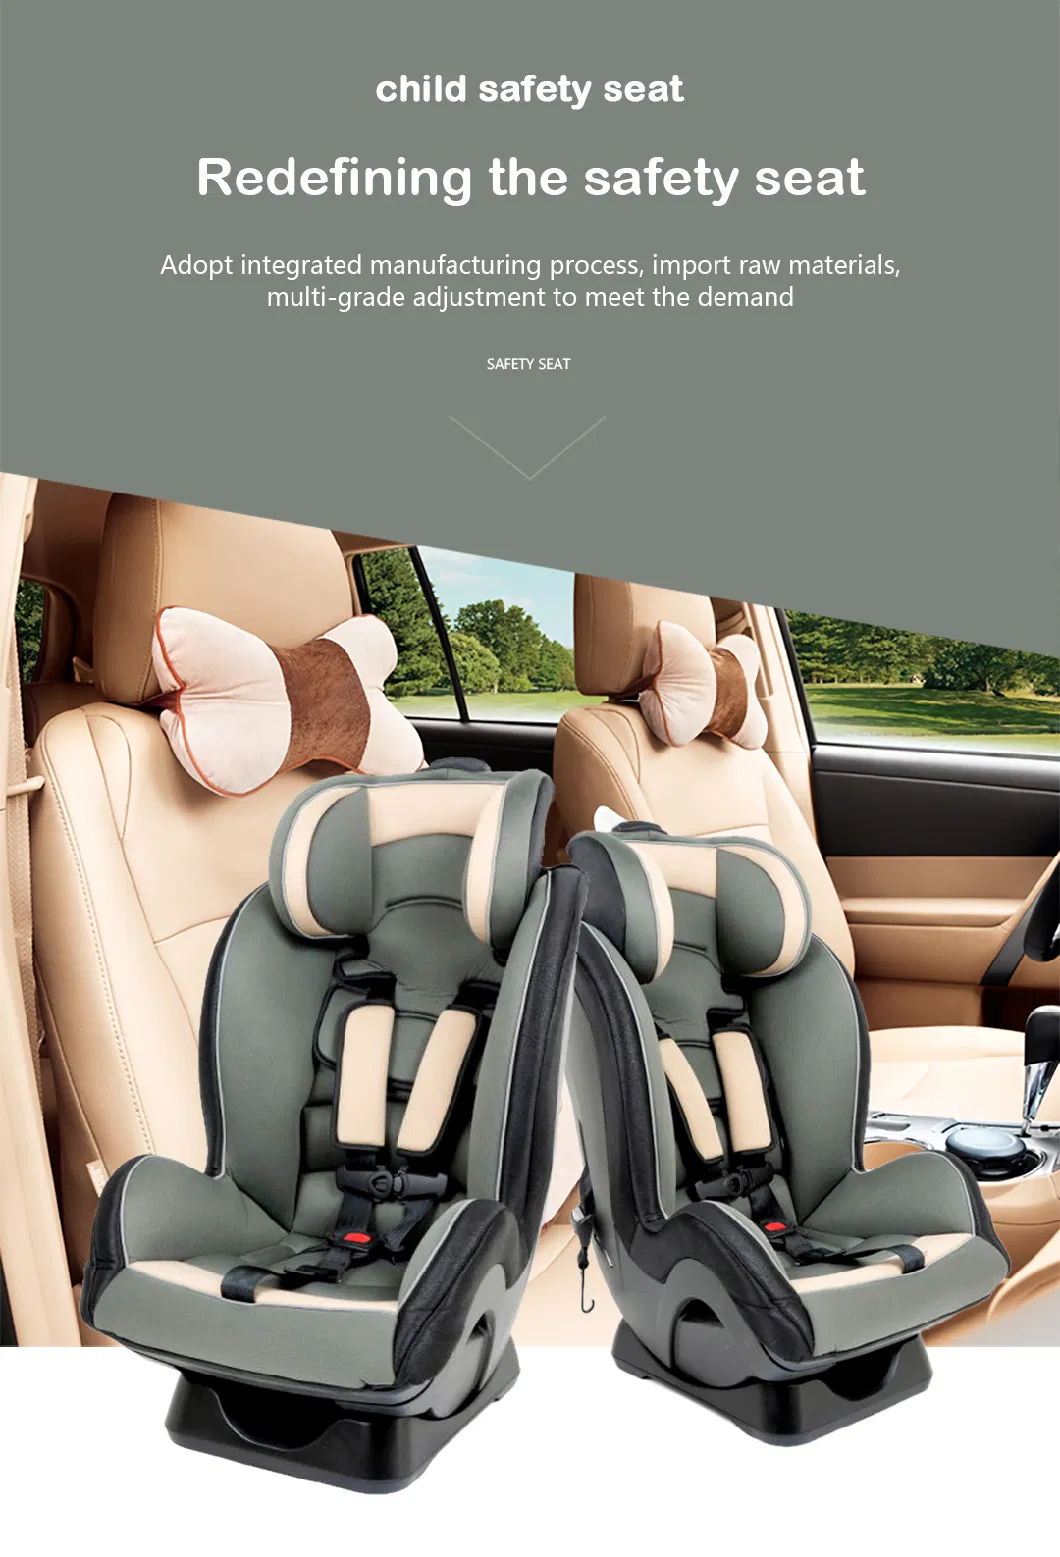 Safety Comfort All-Round Protection of Baby Car Seat